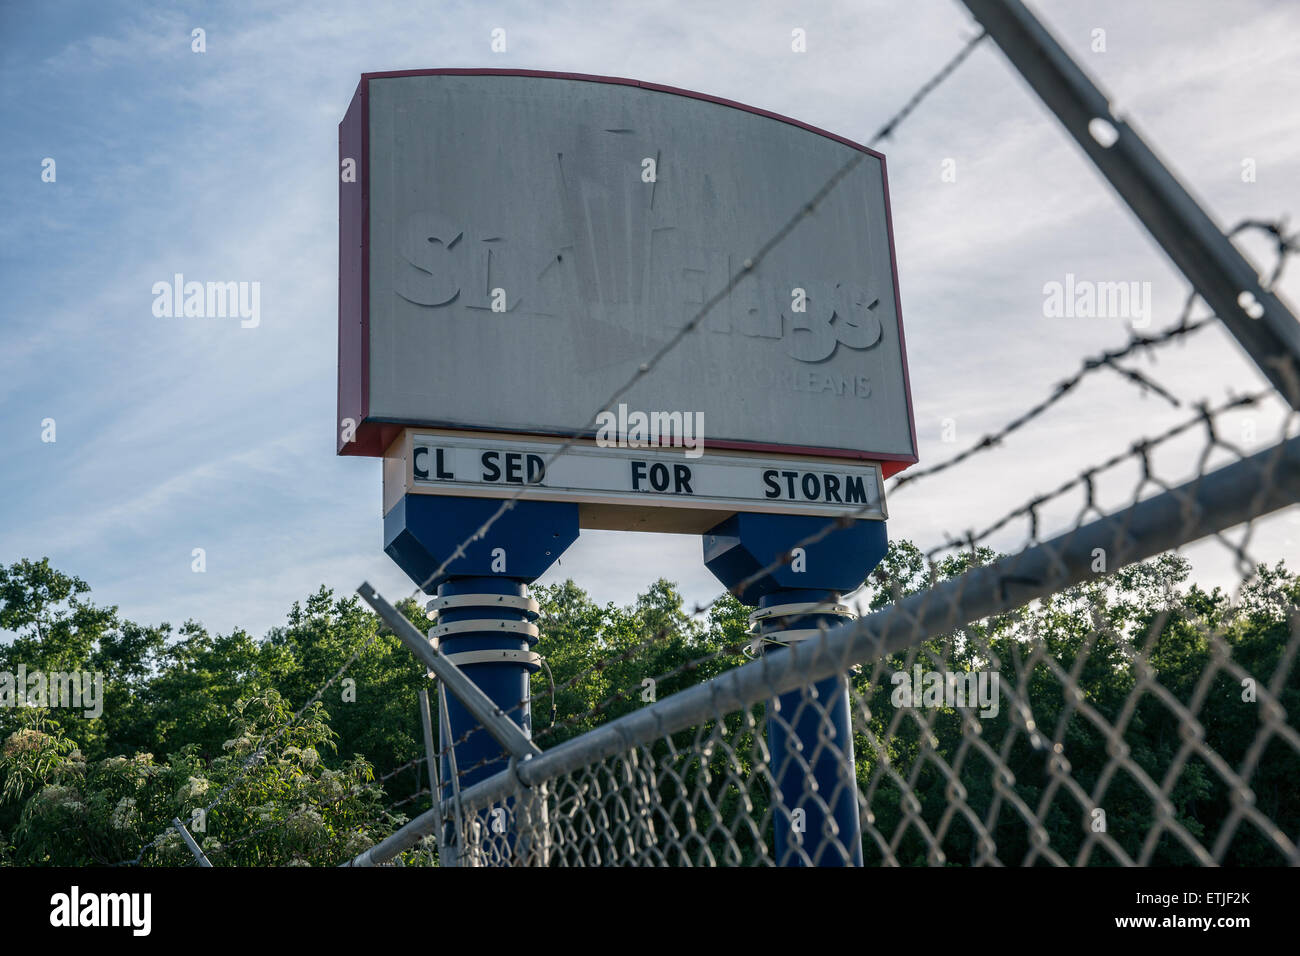 (150614) -- NEW ORLEANS, June 14, 2015 (Xinhua) -- Photo taken on June 11, 2015 shows a faded advertisement board of the closed New Orleans Six Flags theme park. Despite various announced plans to redevelop the site, as of June 2015, it is still an abandoned amusement park in extremely poor condition. Ten years after Hurricane Katrina brought New Orleans to its knees and left an emotional footprint across the United States as people witnessed how the U.S. government failed to respond promptly, a predominantly African-American community of the city still struggles to define what their post-Katr Stock Photo